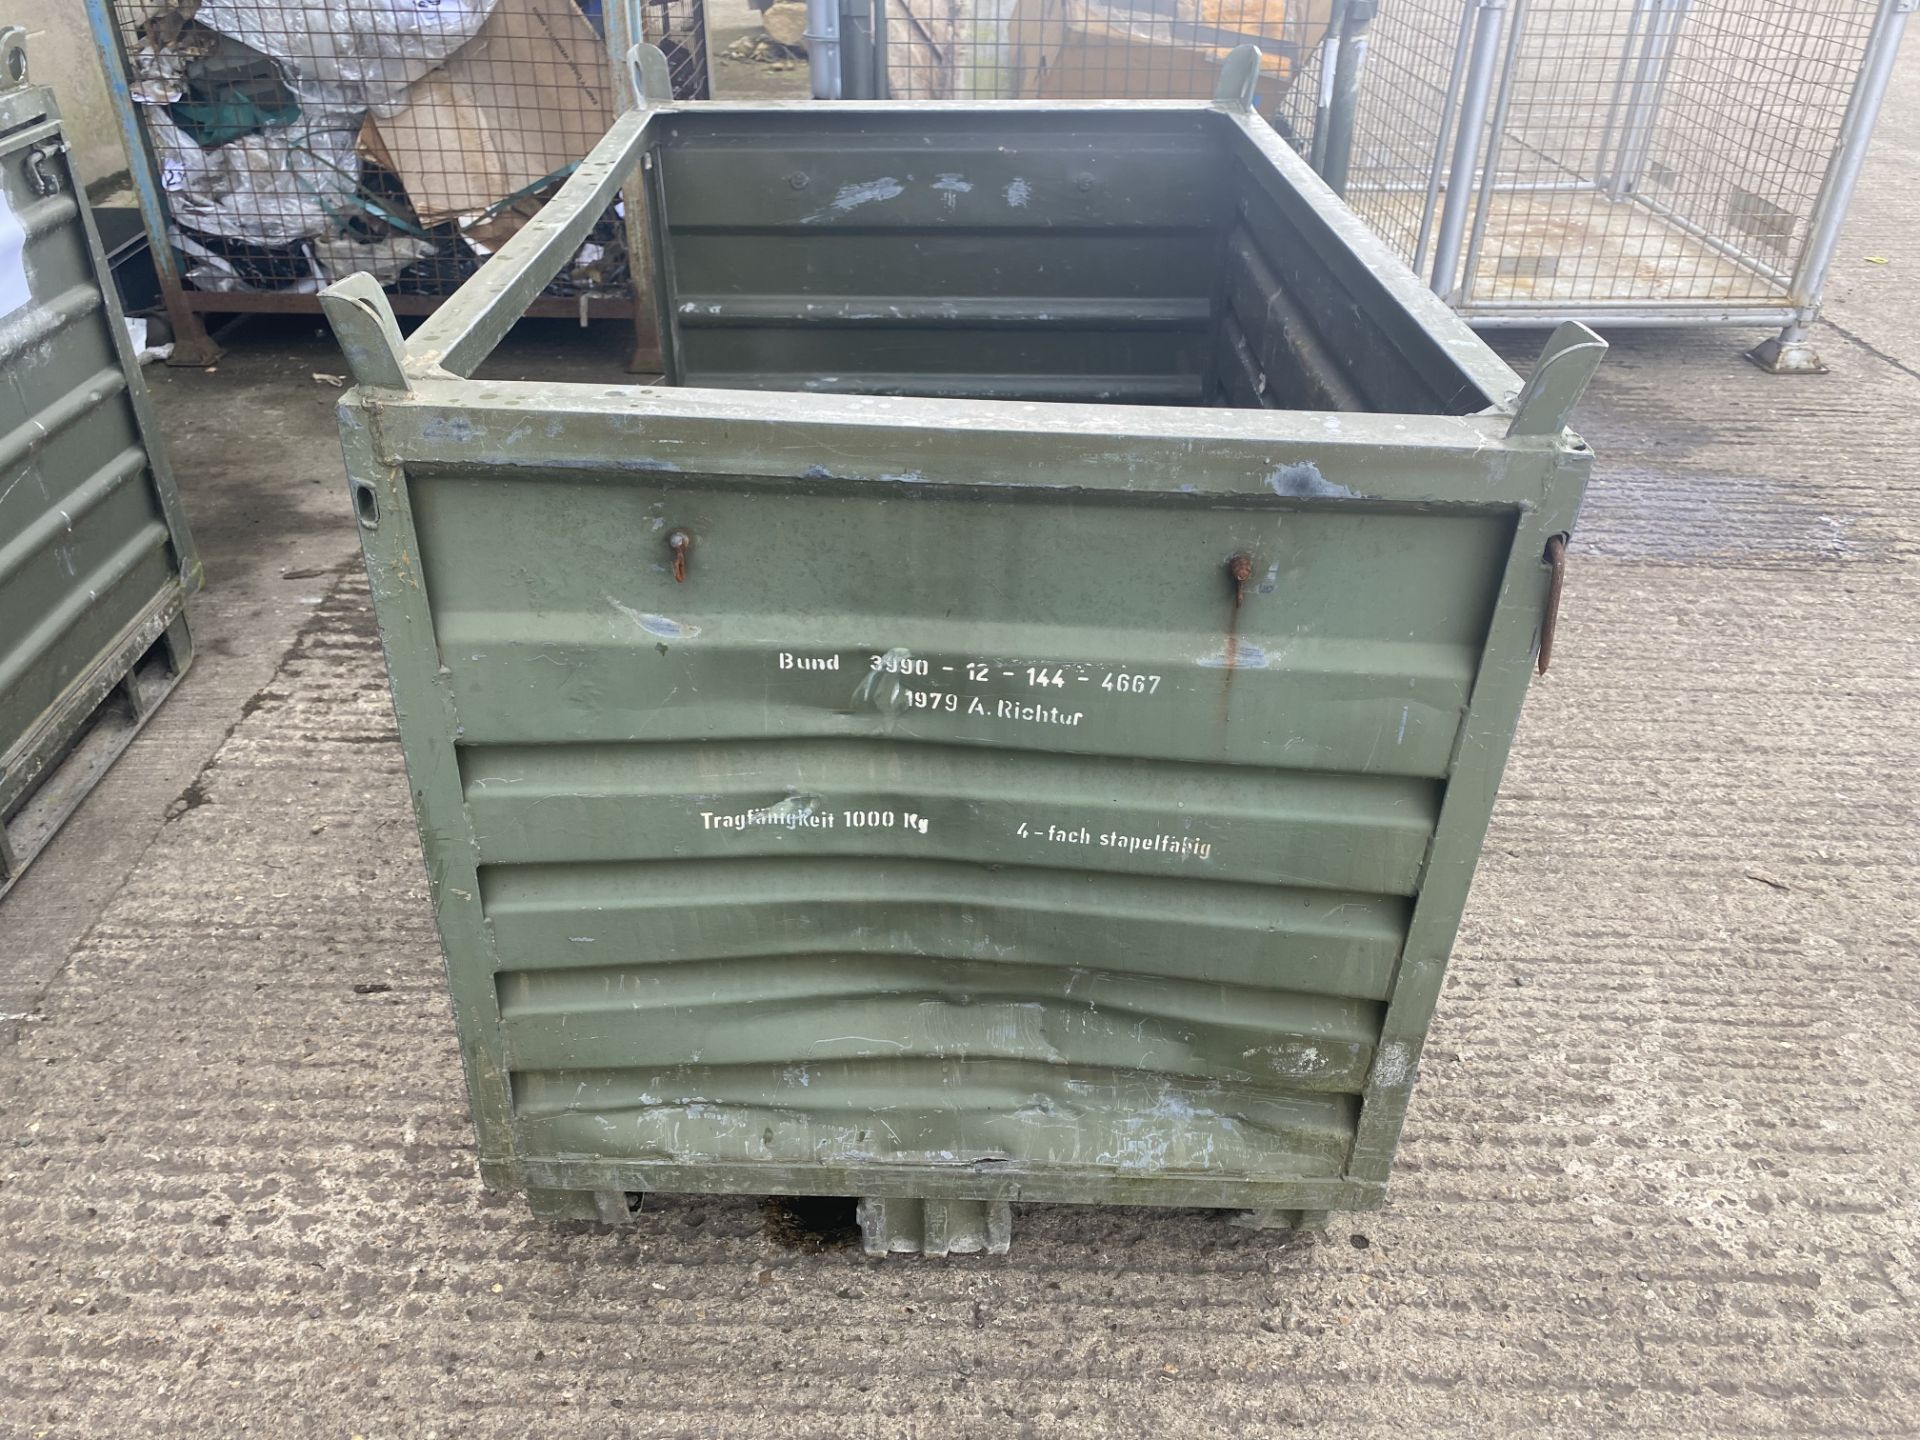 1 x Metal Storage / Transport Crate with Fold down side, Size 130 x 90 x 90 cm - Image 4 of 7